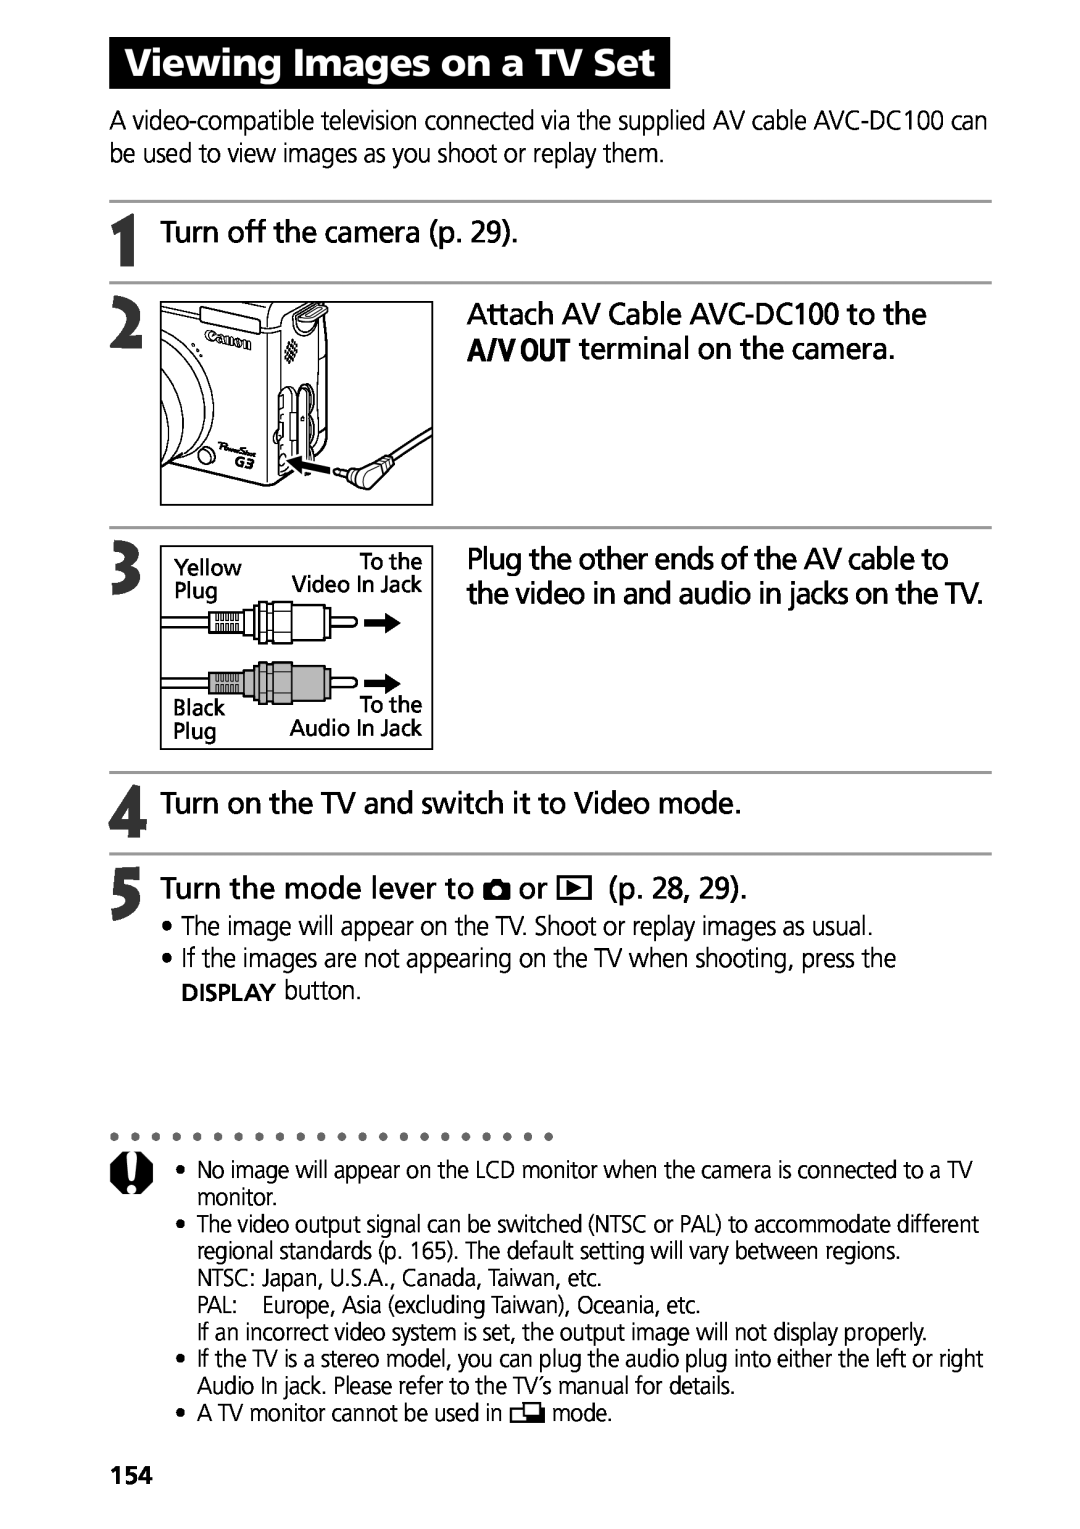 Canon G3 Viewing Images on a TV Set, terminal on the camera, Turn on the TV and switch it to Video mode, p. 28, PlugYellow 